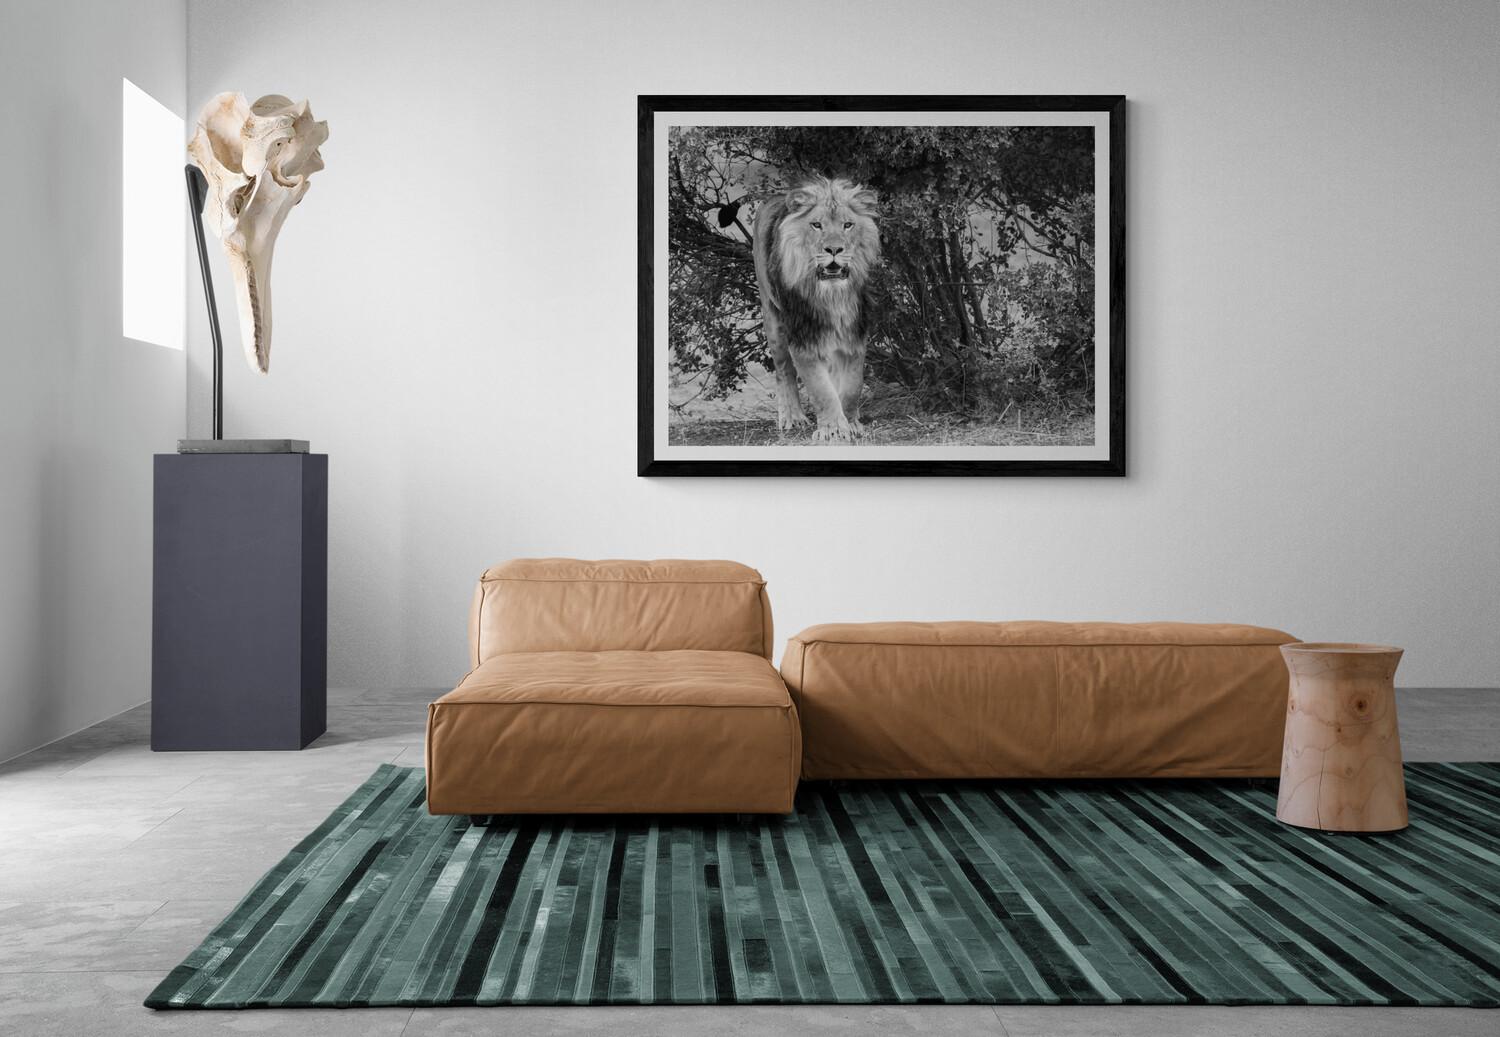 This is a contemporary photograph of an African Lion shot by Shane Russeck
Unsigned
Printed on archival luster paper.  

Shane Russeck has built a reputation for capturing America's landscapes, cultures and endangered animals. Born in Philadelphia